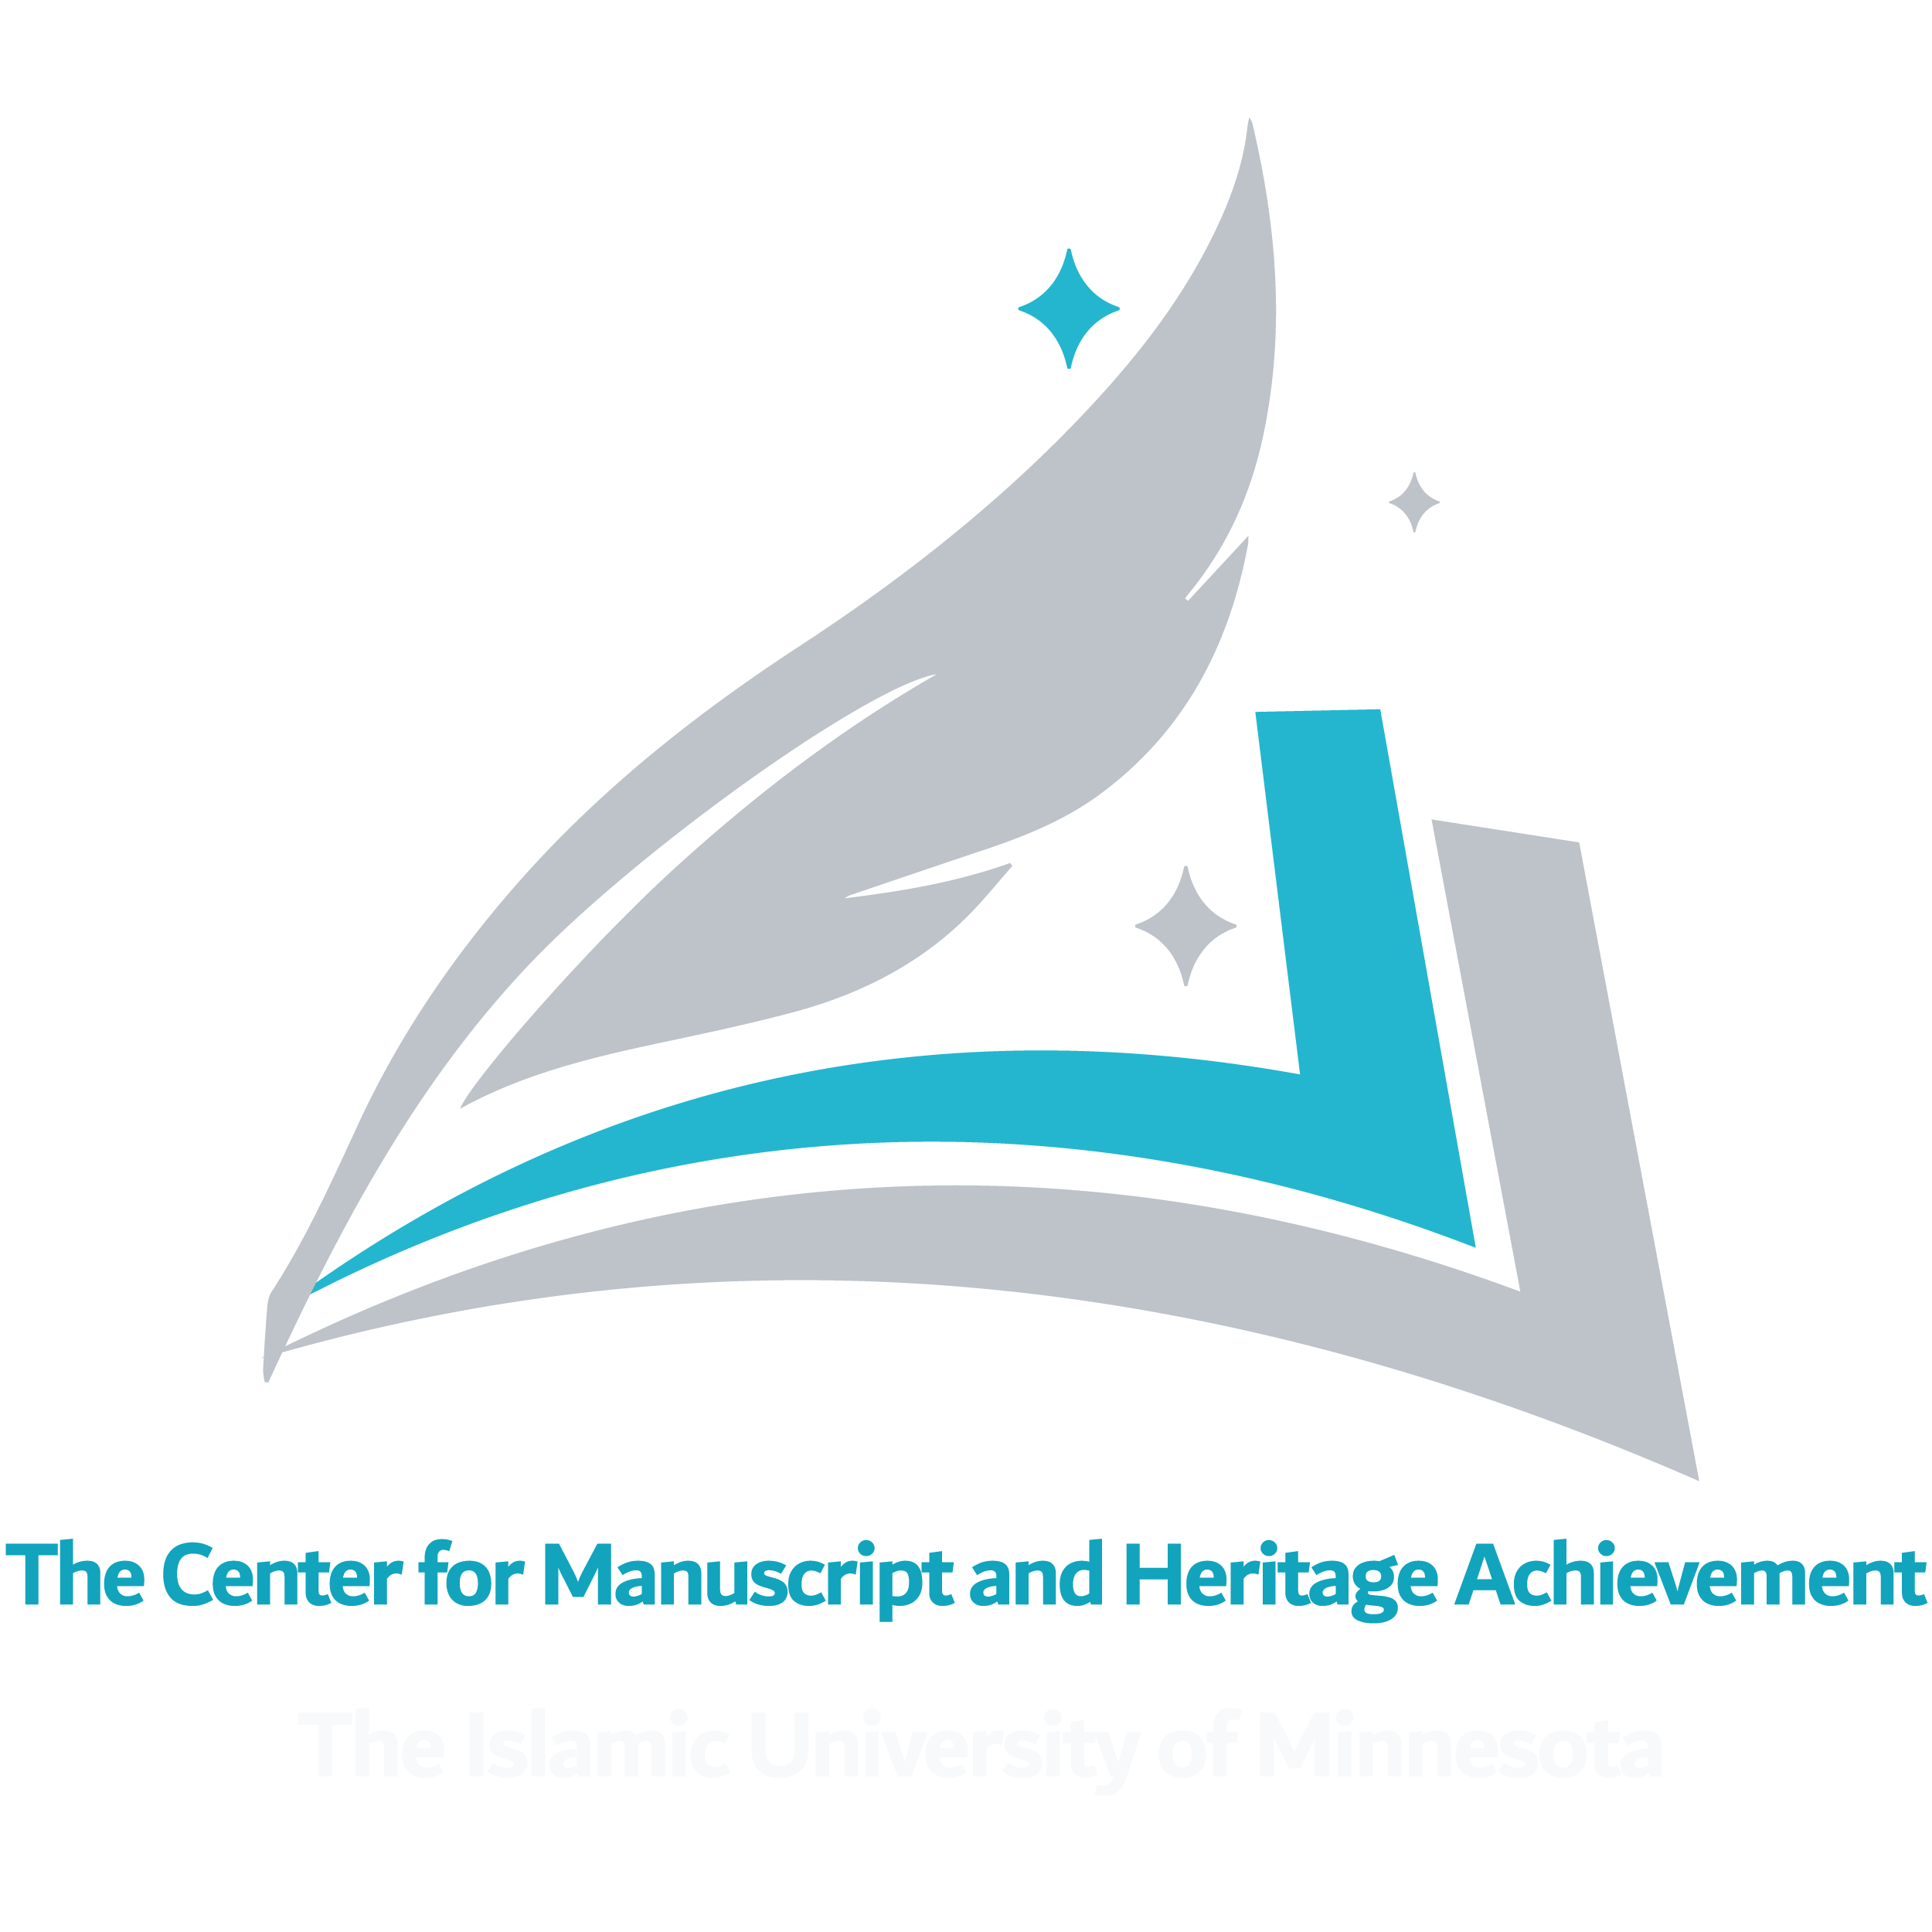 The Center for Manuscripts and Heritage Achievement